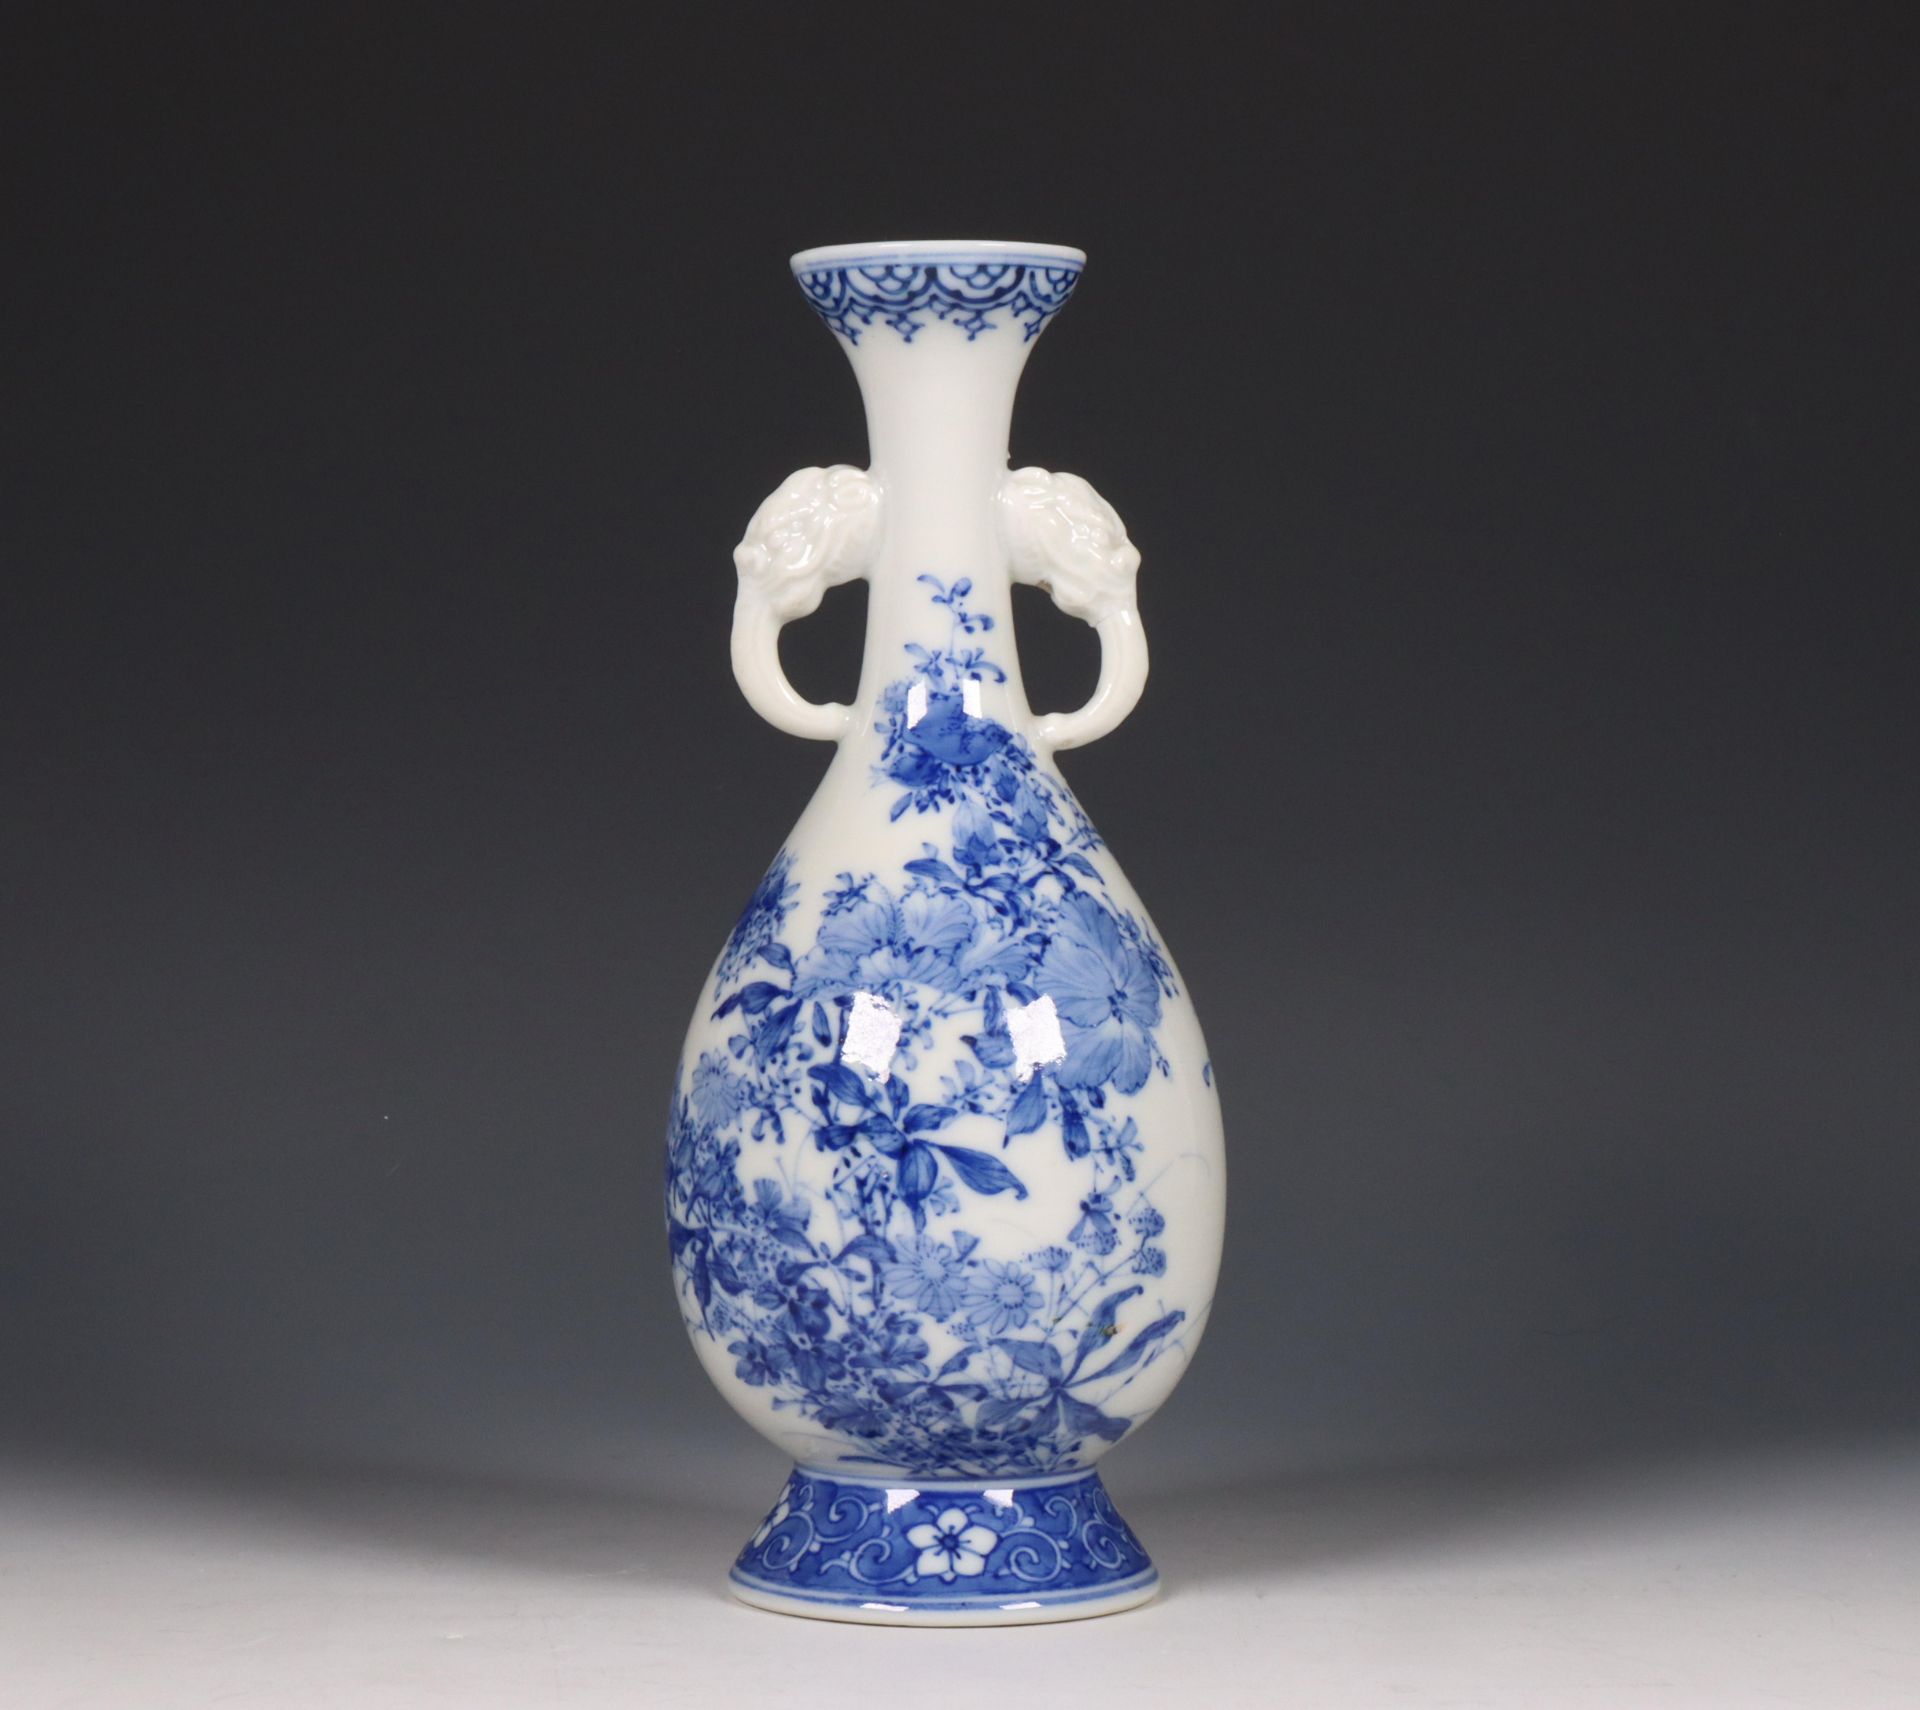 Japan, blue and white porcelain pear-shaped vase, 20th century,